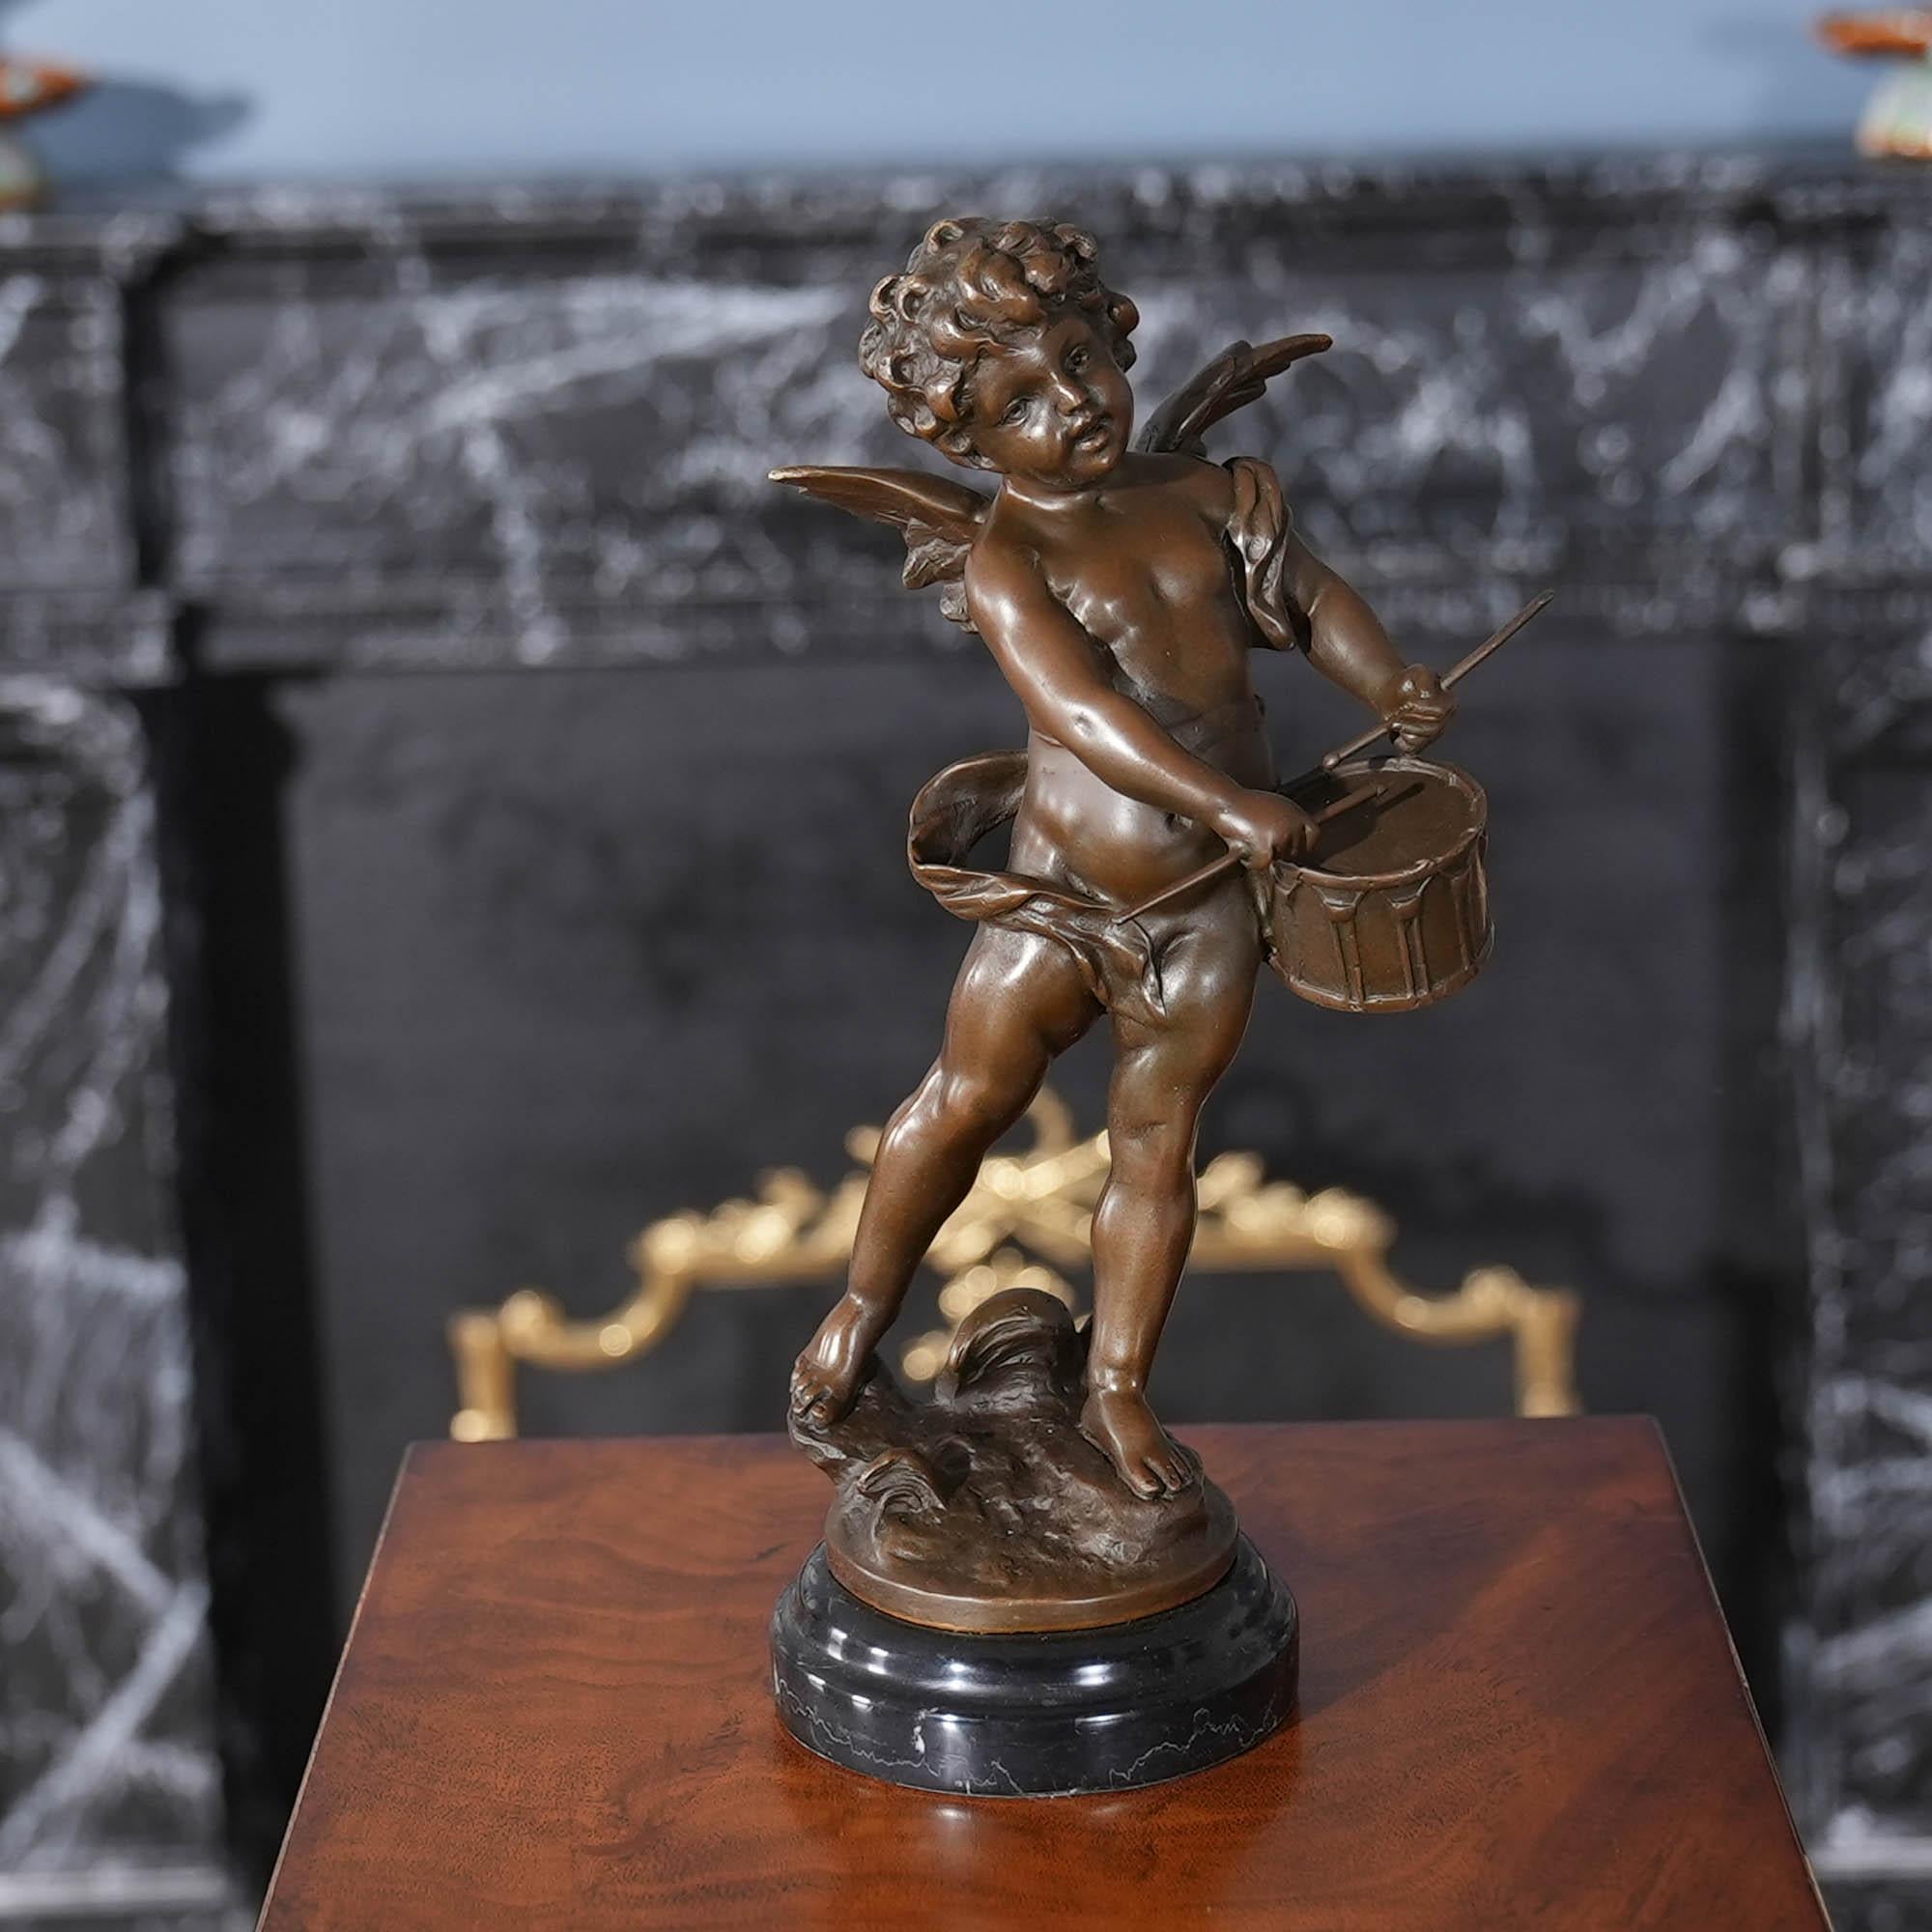 Beautiful even when standing still the Bronze Drummer Cherub on Marble Base is a striking addition to any setting. Using traditional lost wax casting methods the Bronze Drummer Cherub statue has hand chaised details added to give a high level of